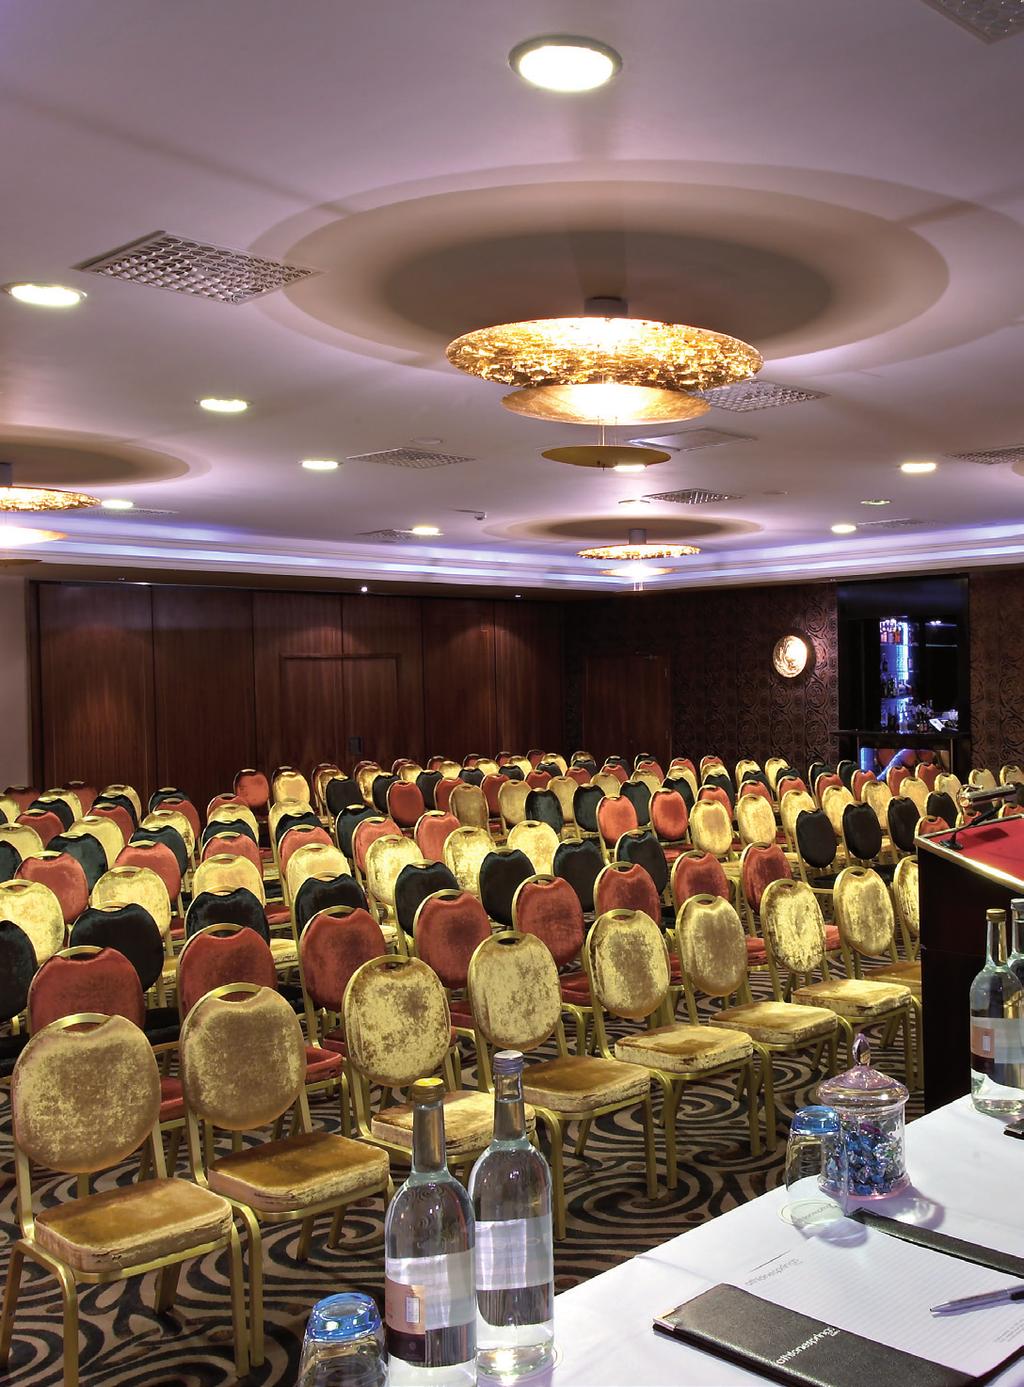 +Conference, Training & Meetings +Your Conference The Clonellan is the perfect backdrop for your important conference.